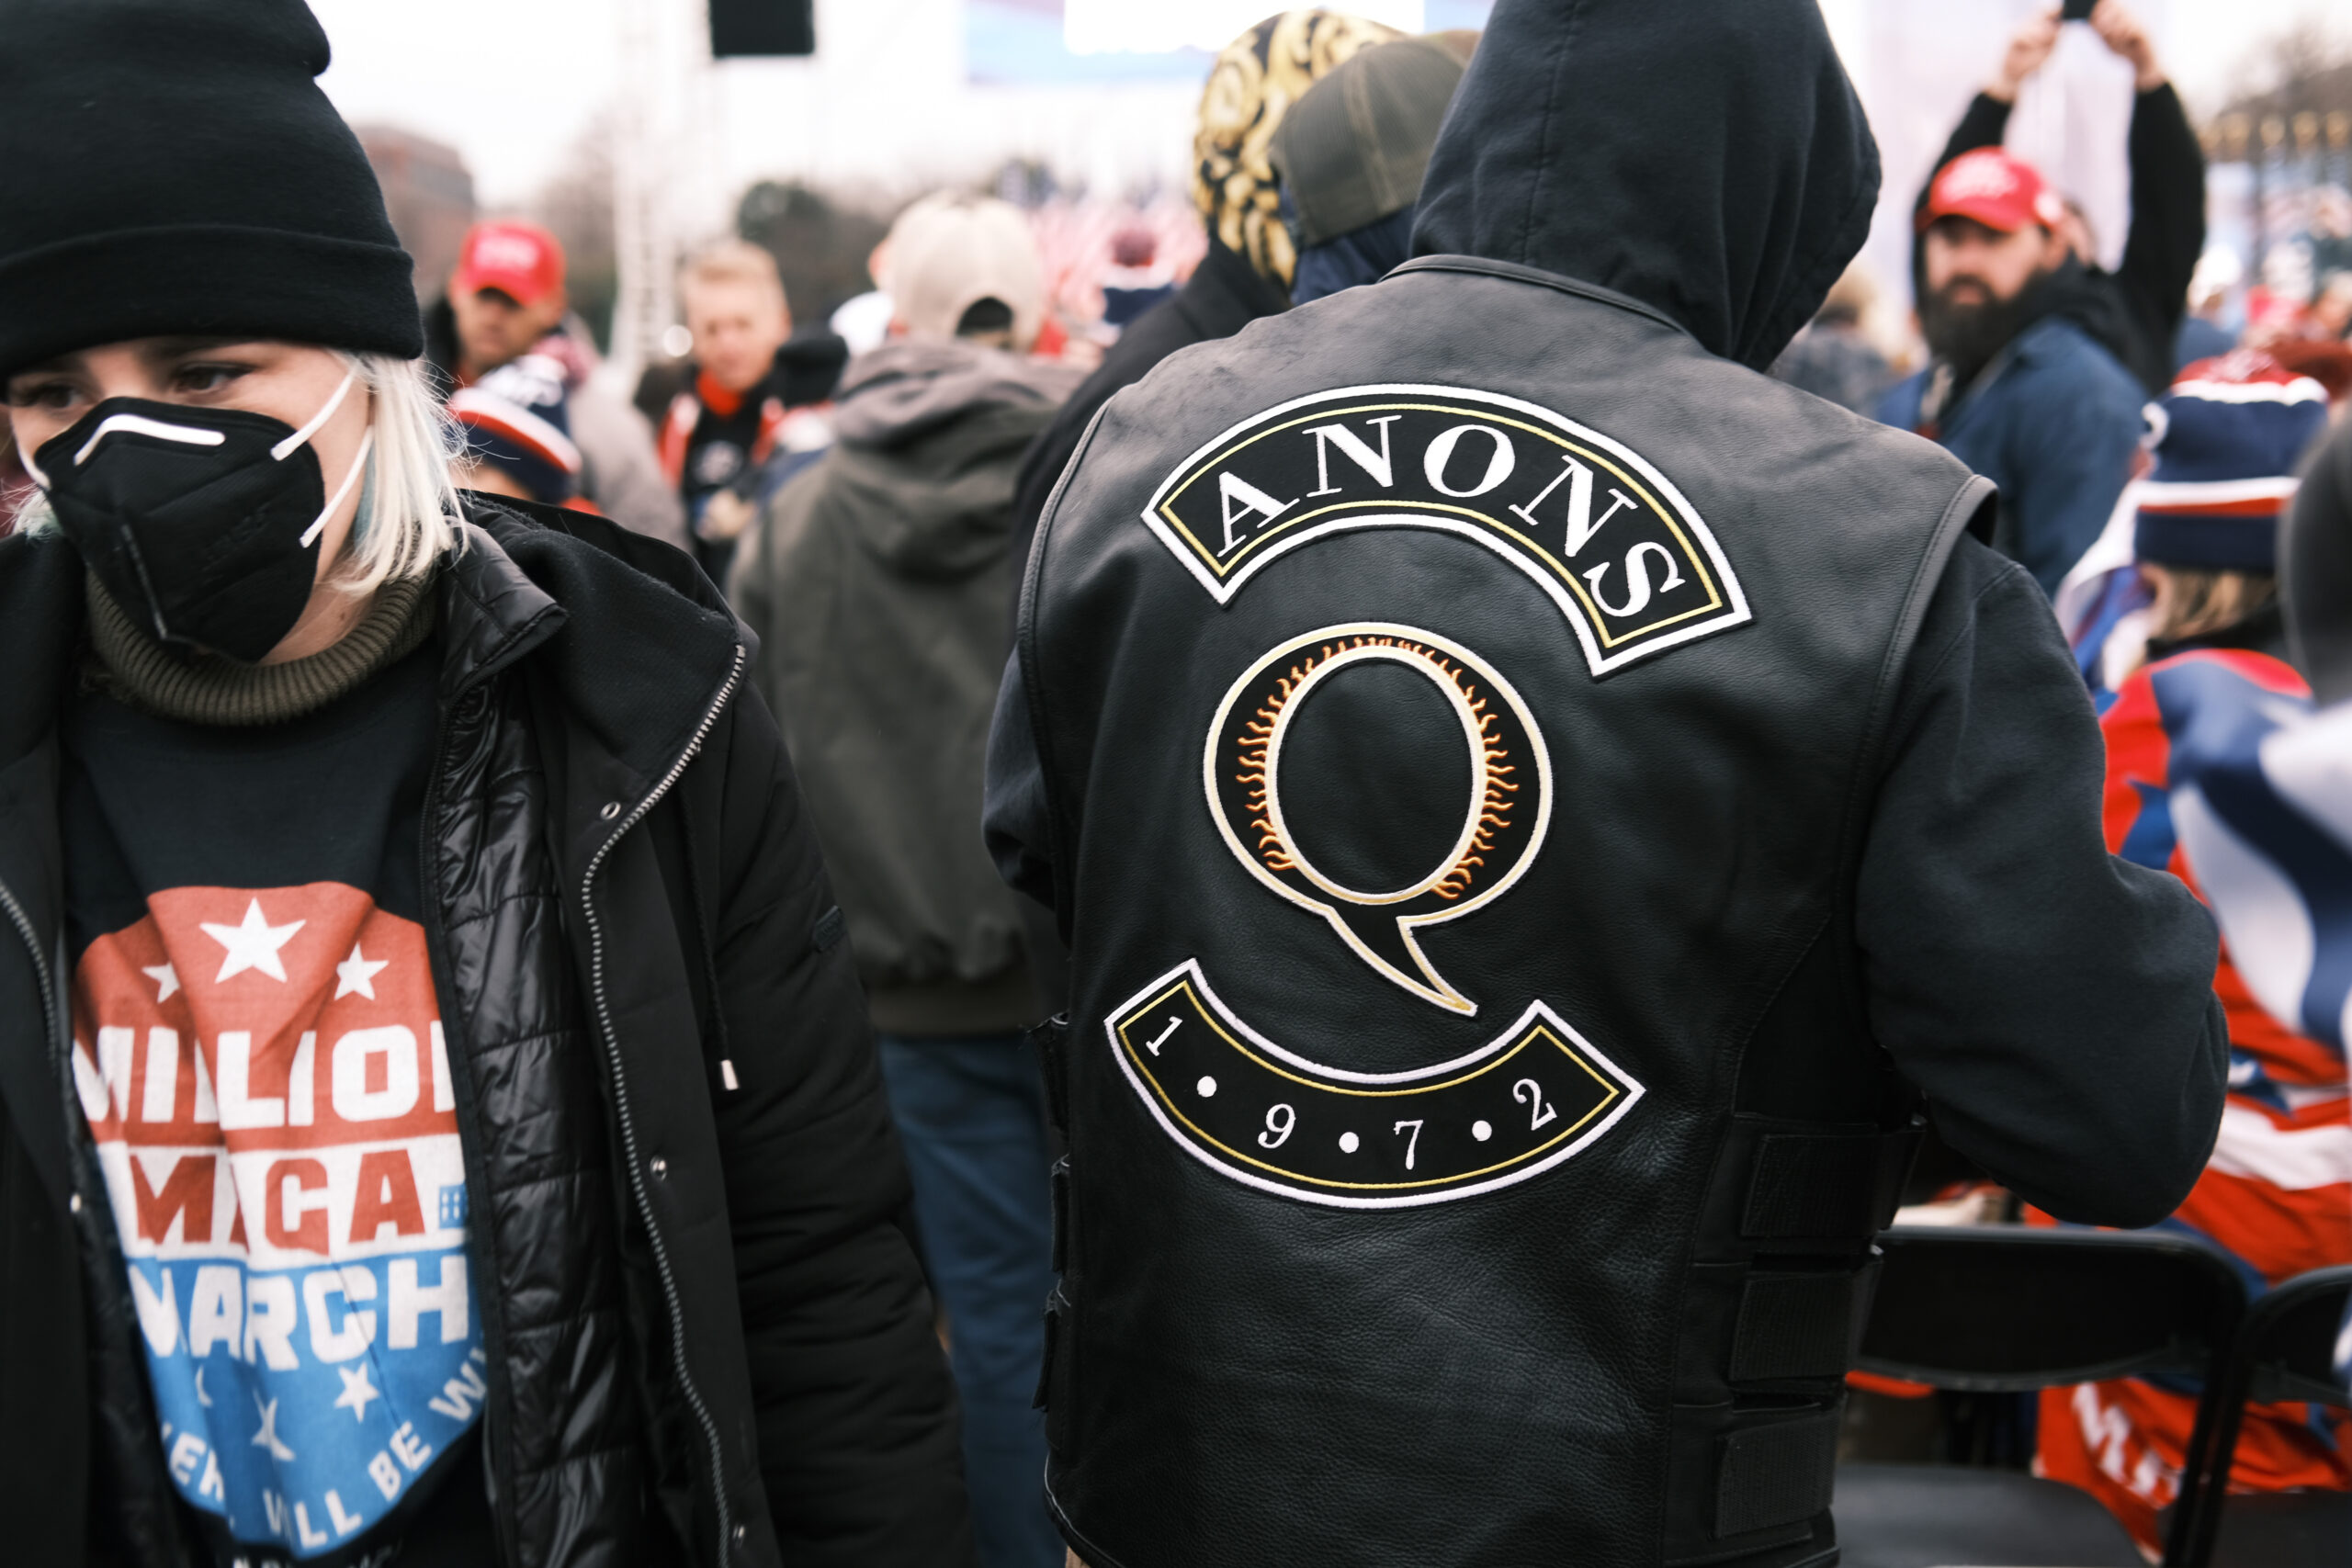 belief-in-qanon-wavers-slightly-among-adults-after-capitol-riots